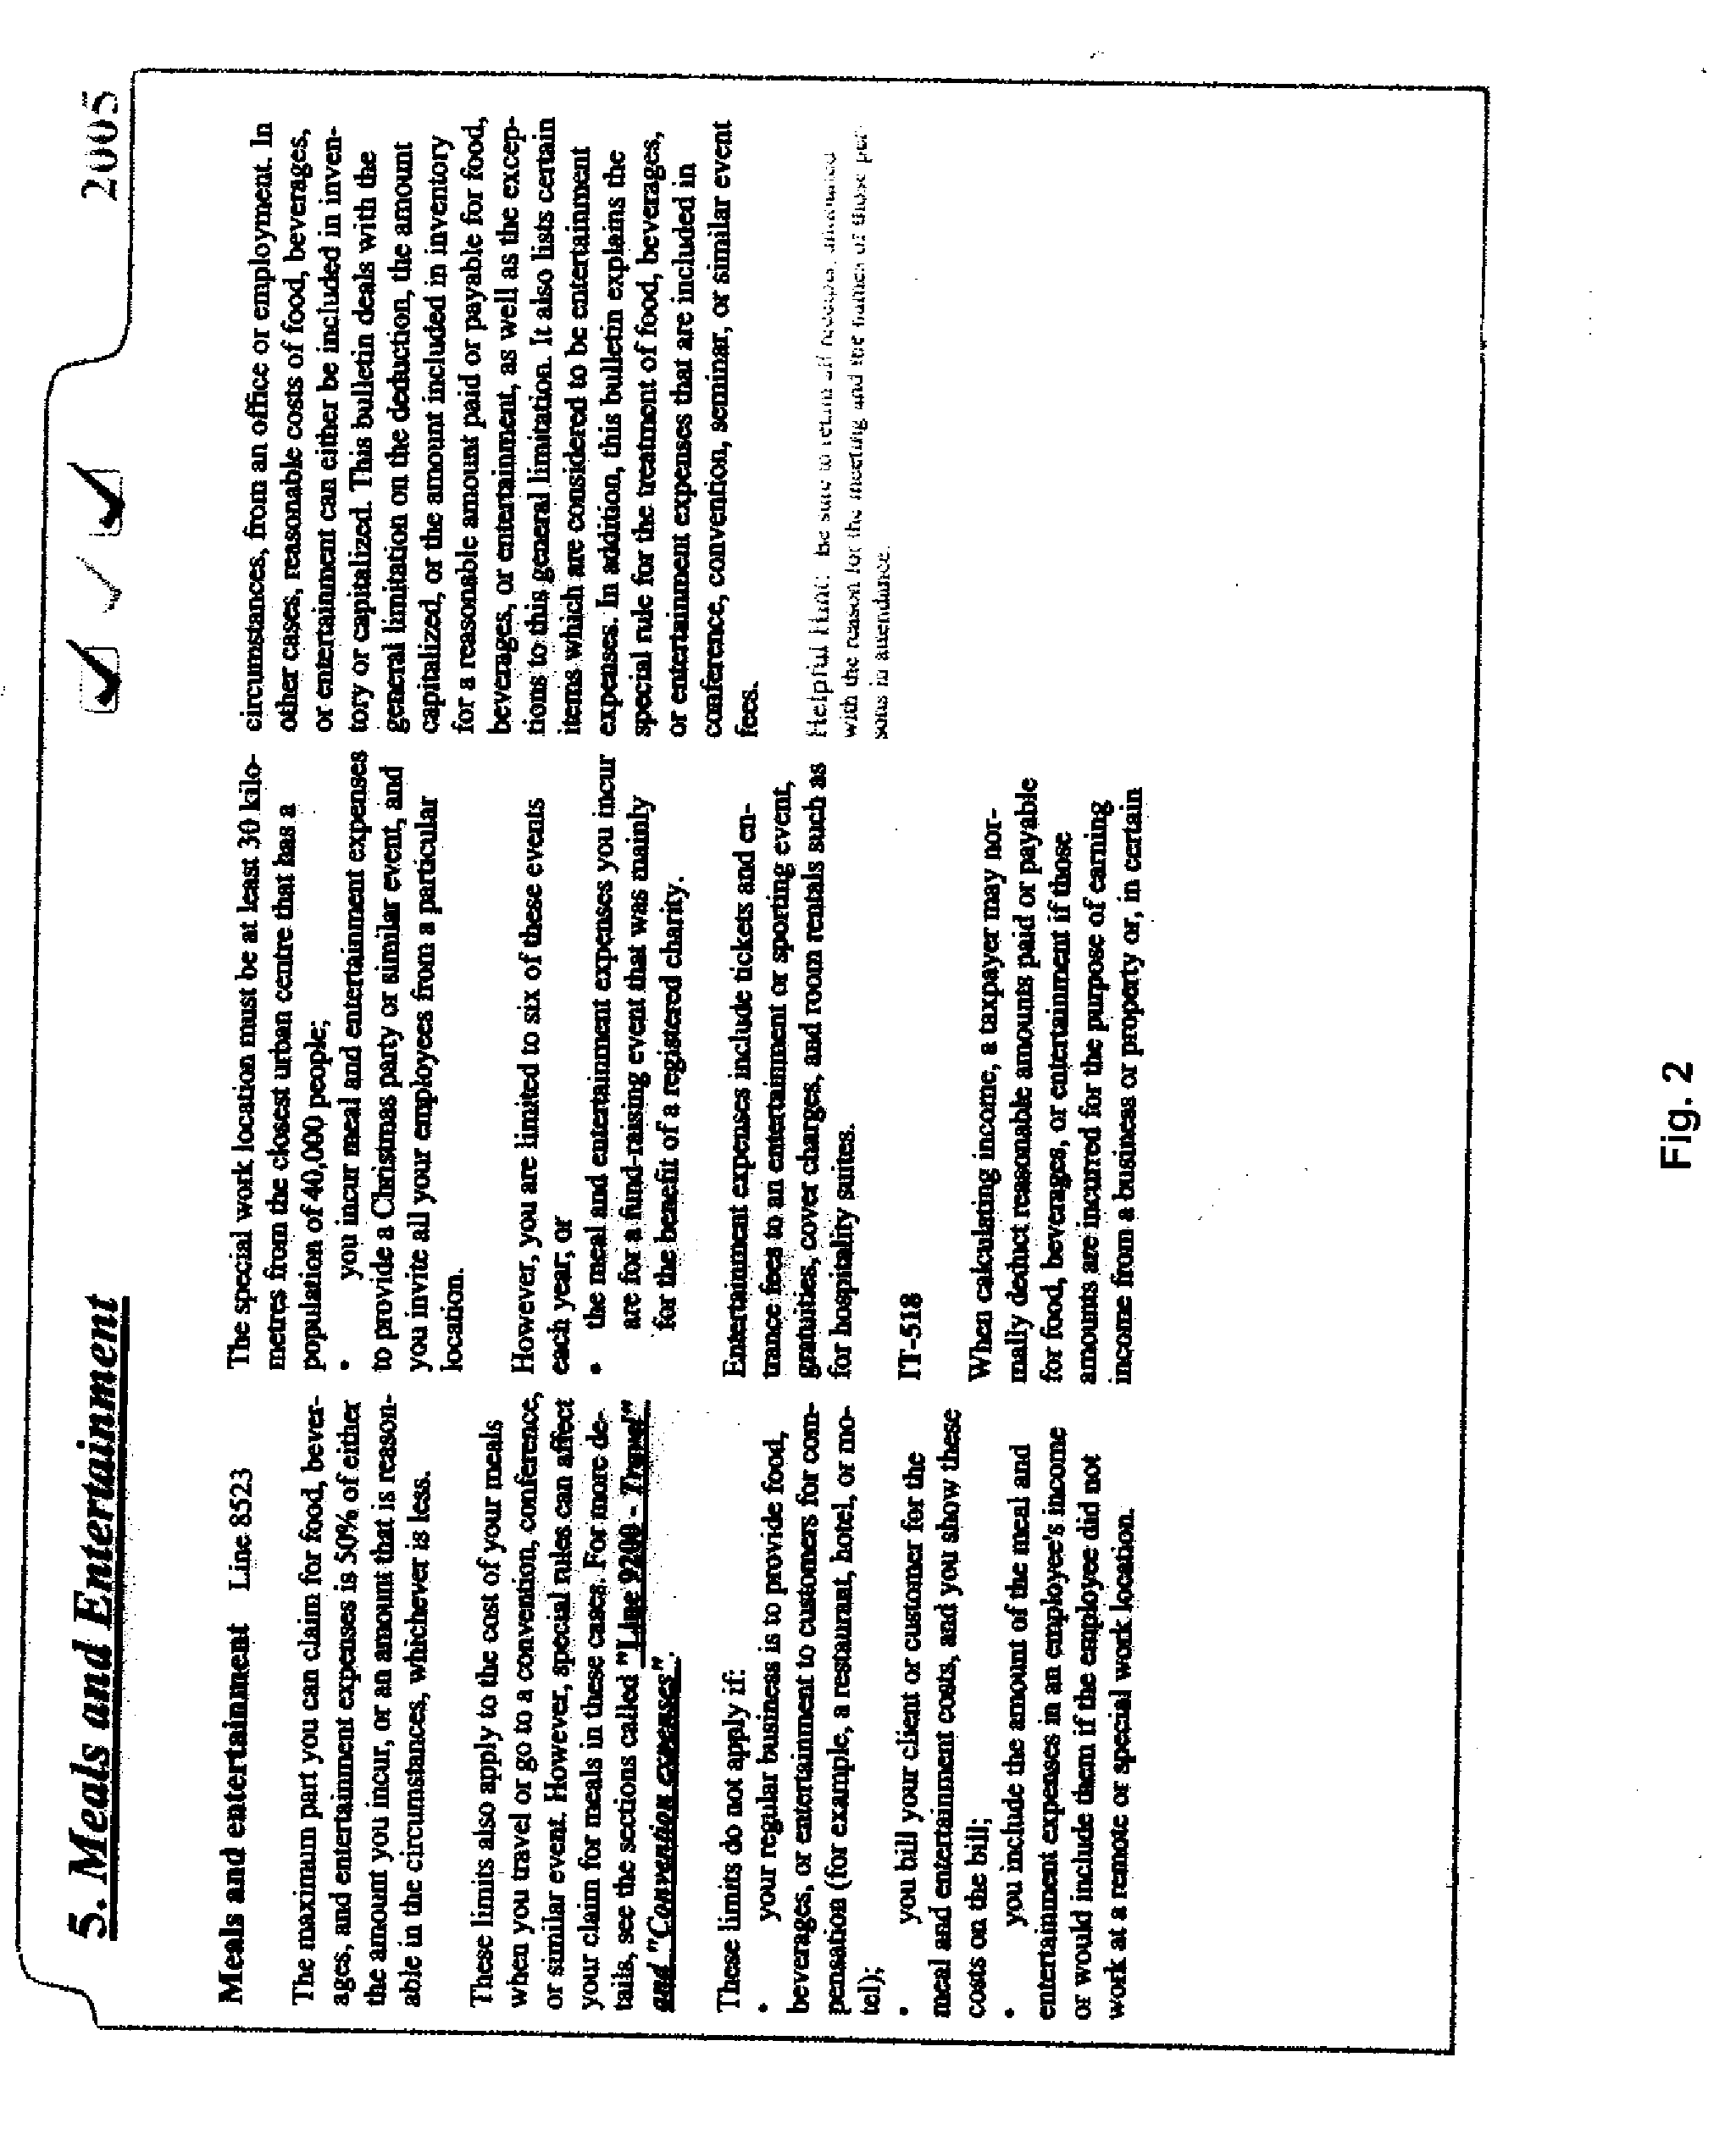 Method and apparatus for collection of personal income tax information